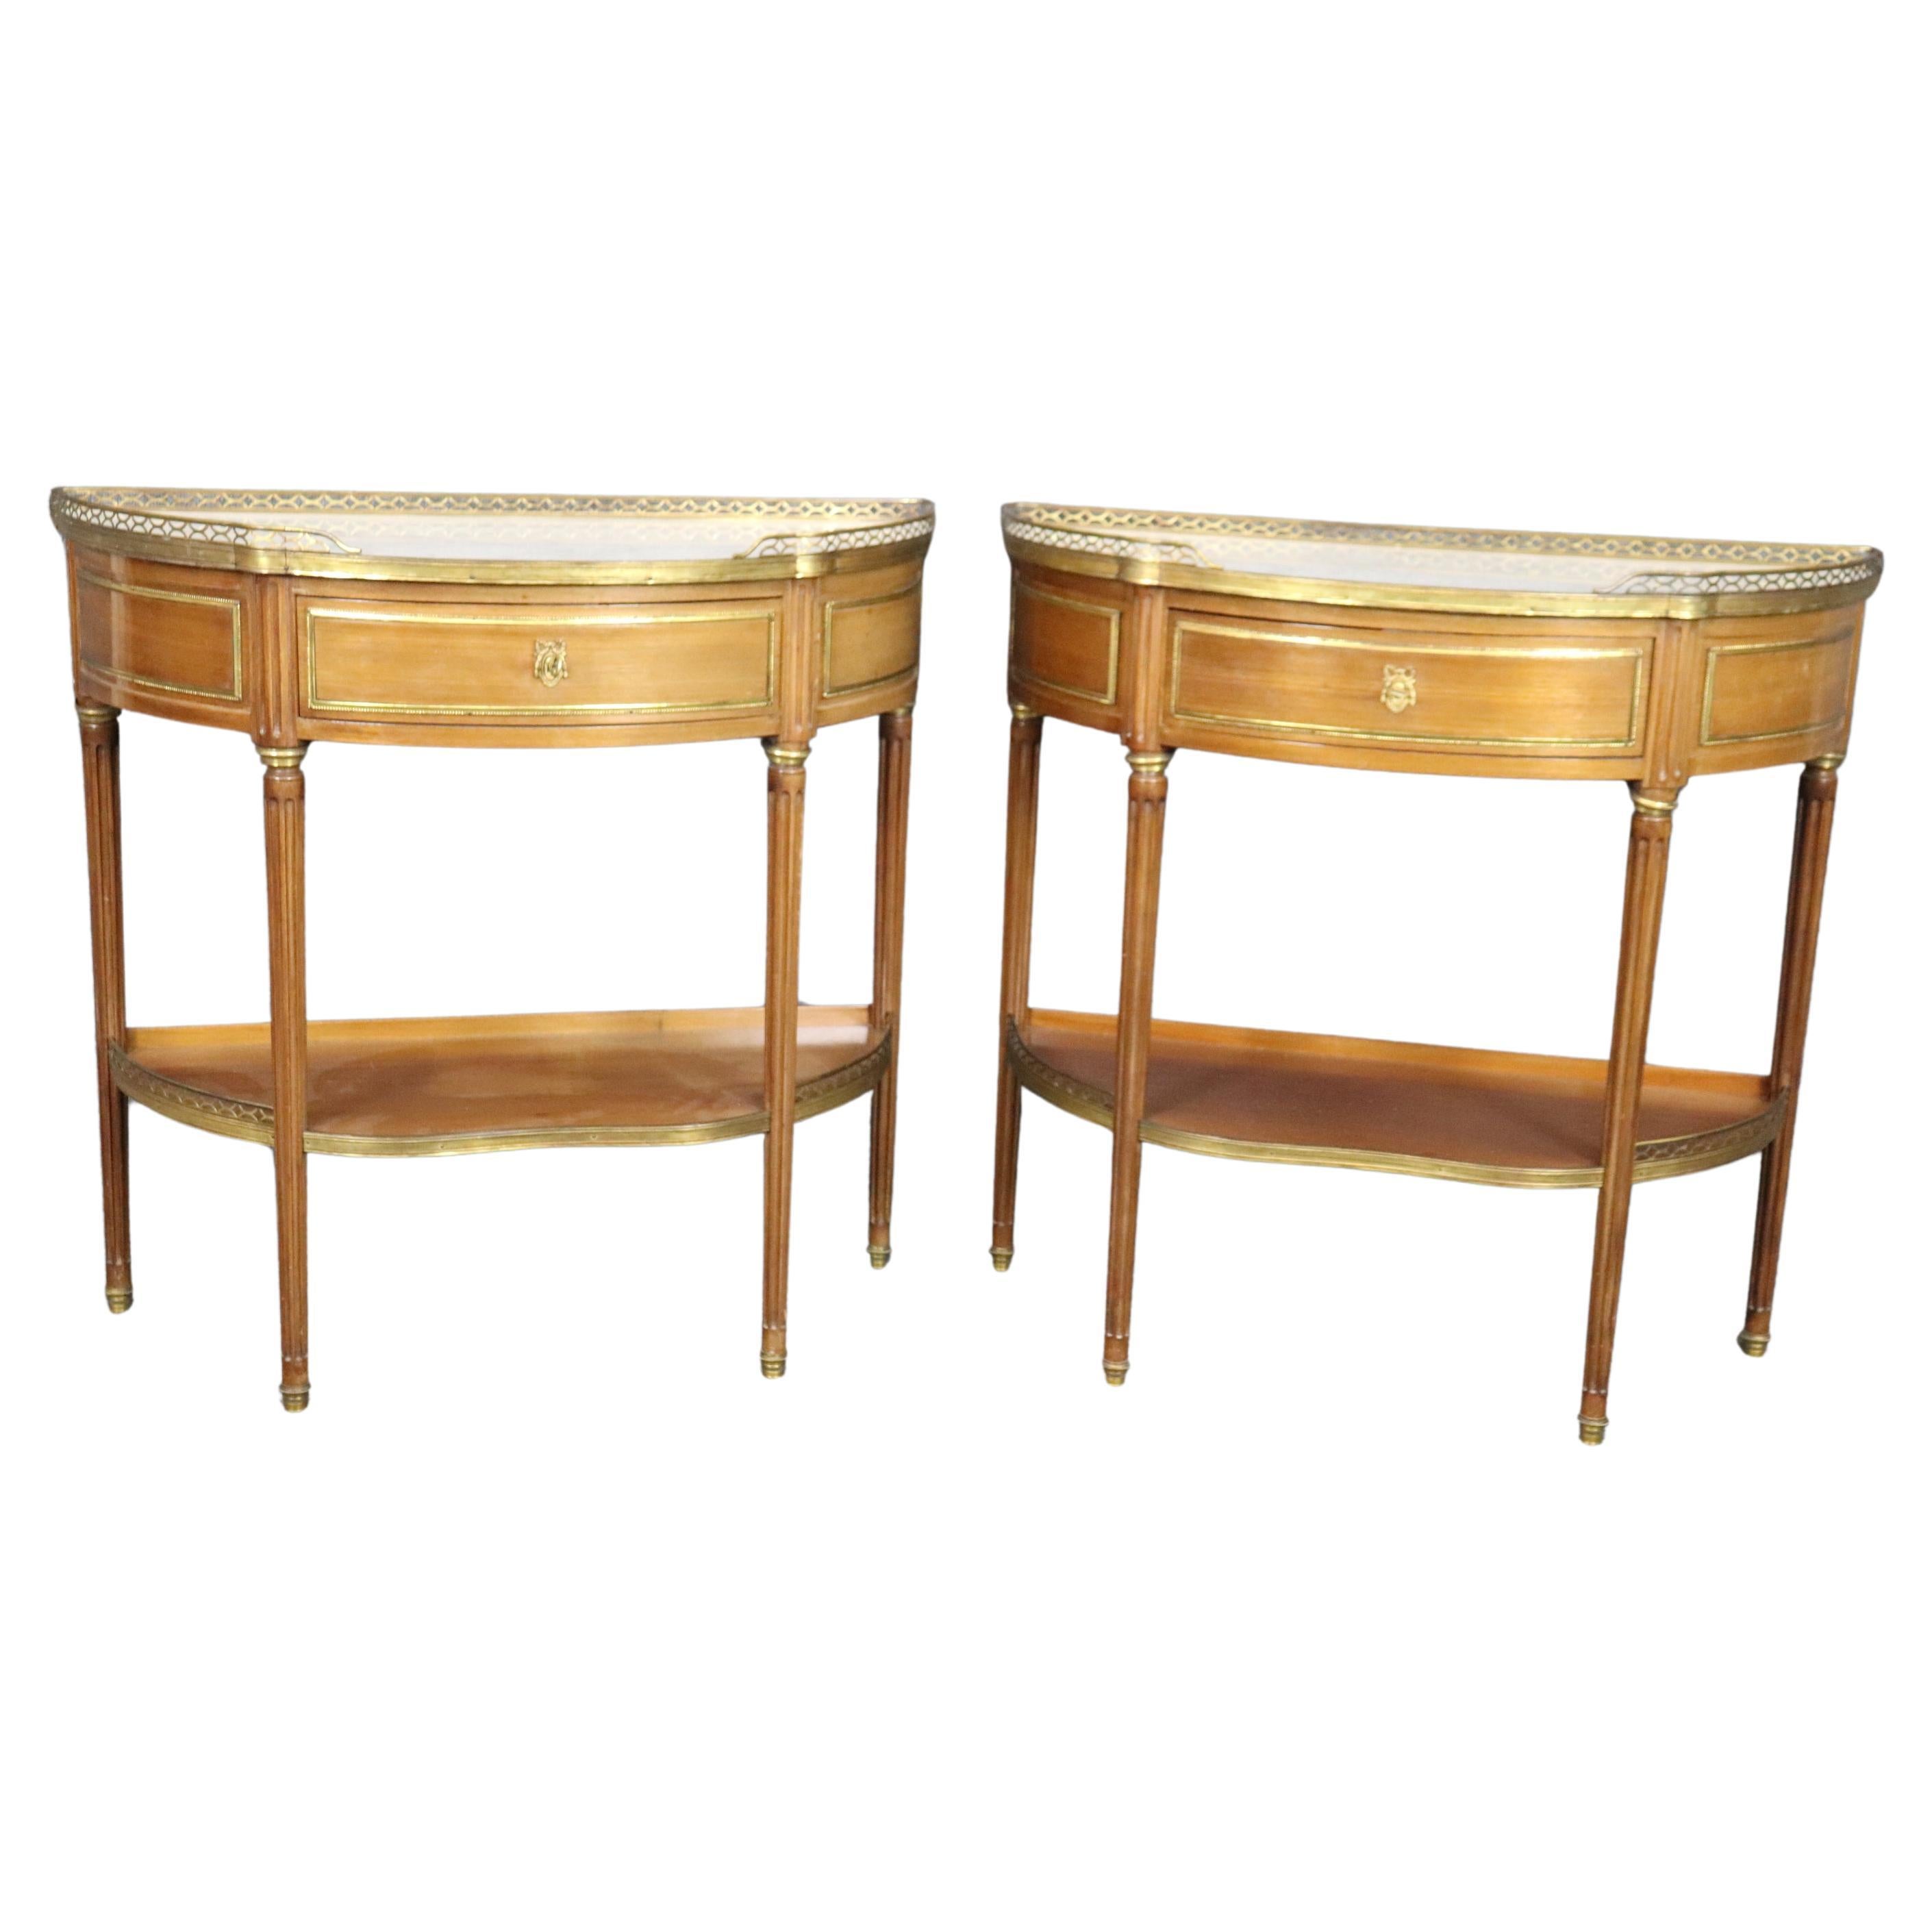  Superb Pair of Marble Top Bronze Mounted French Demilune Console Tables 